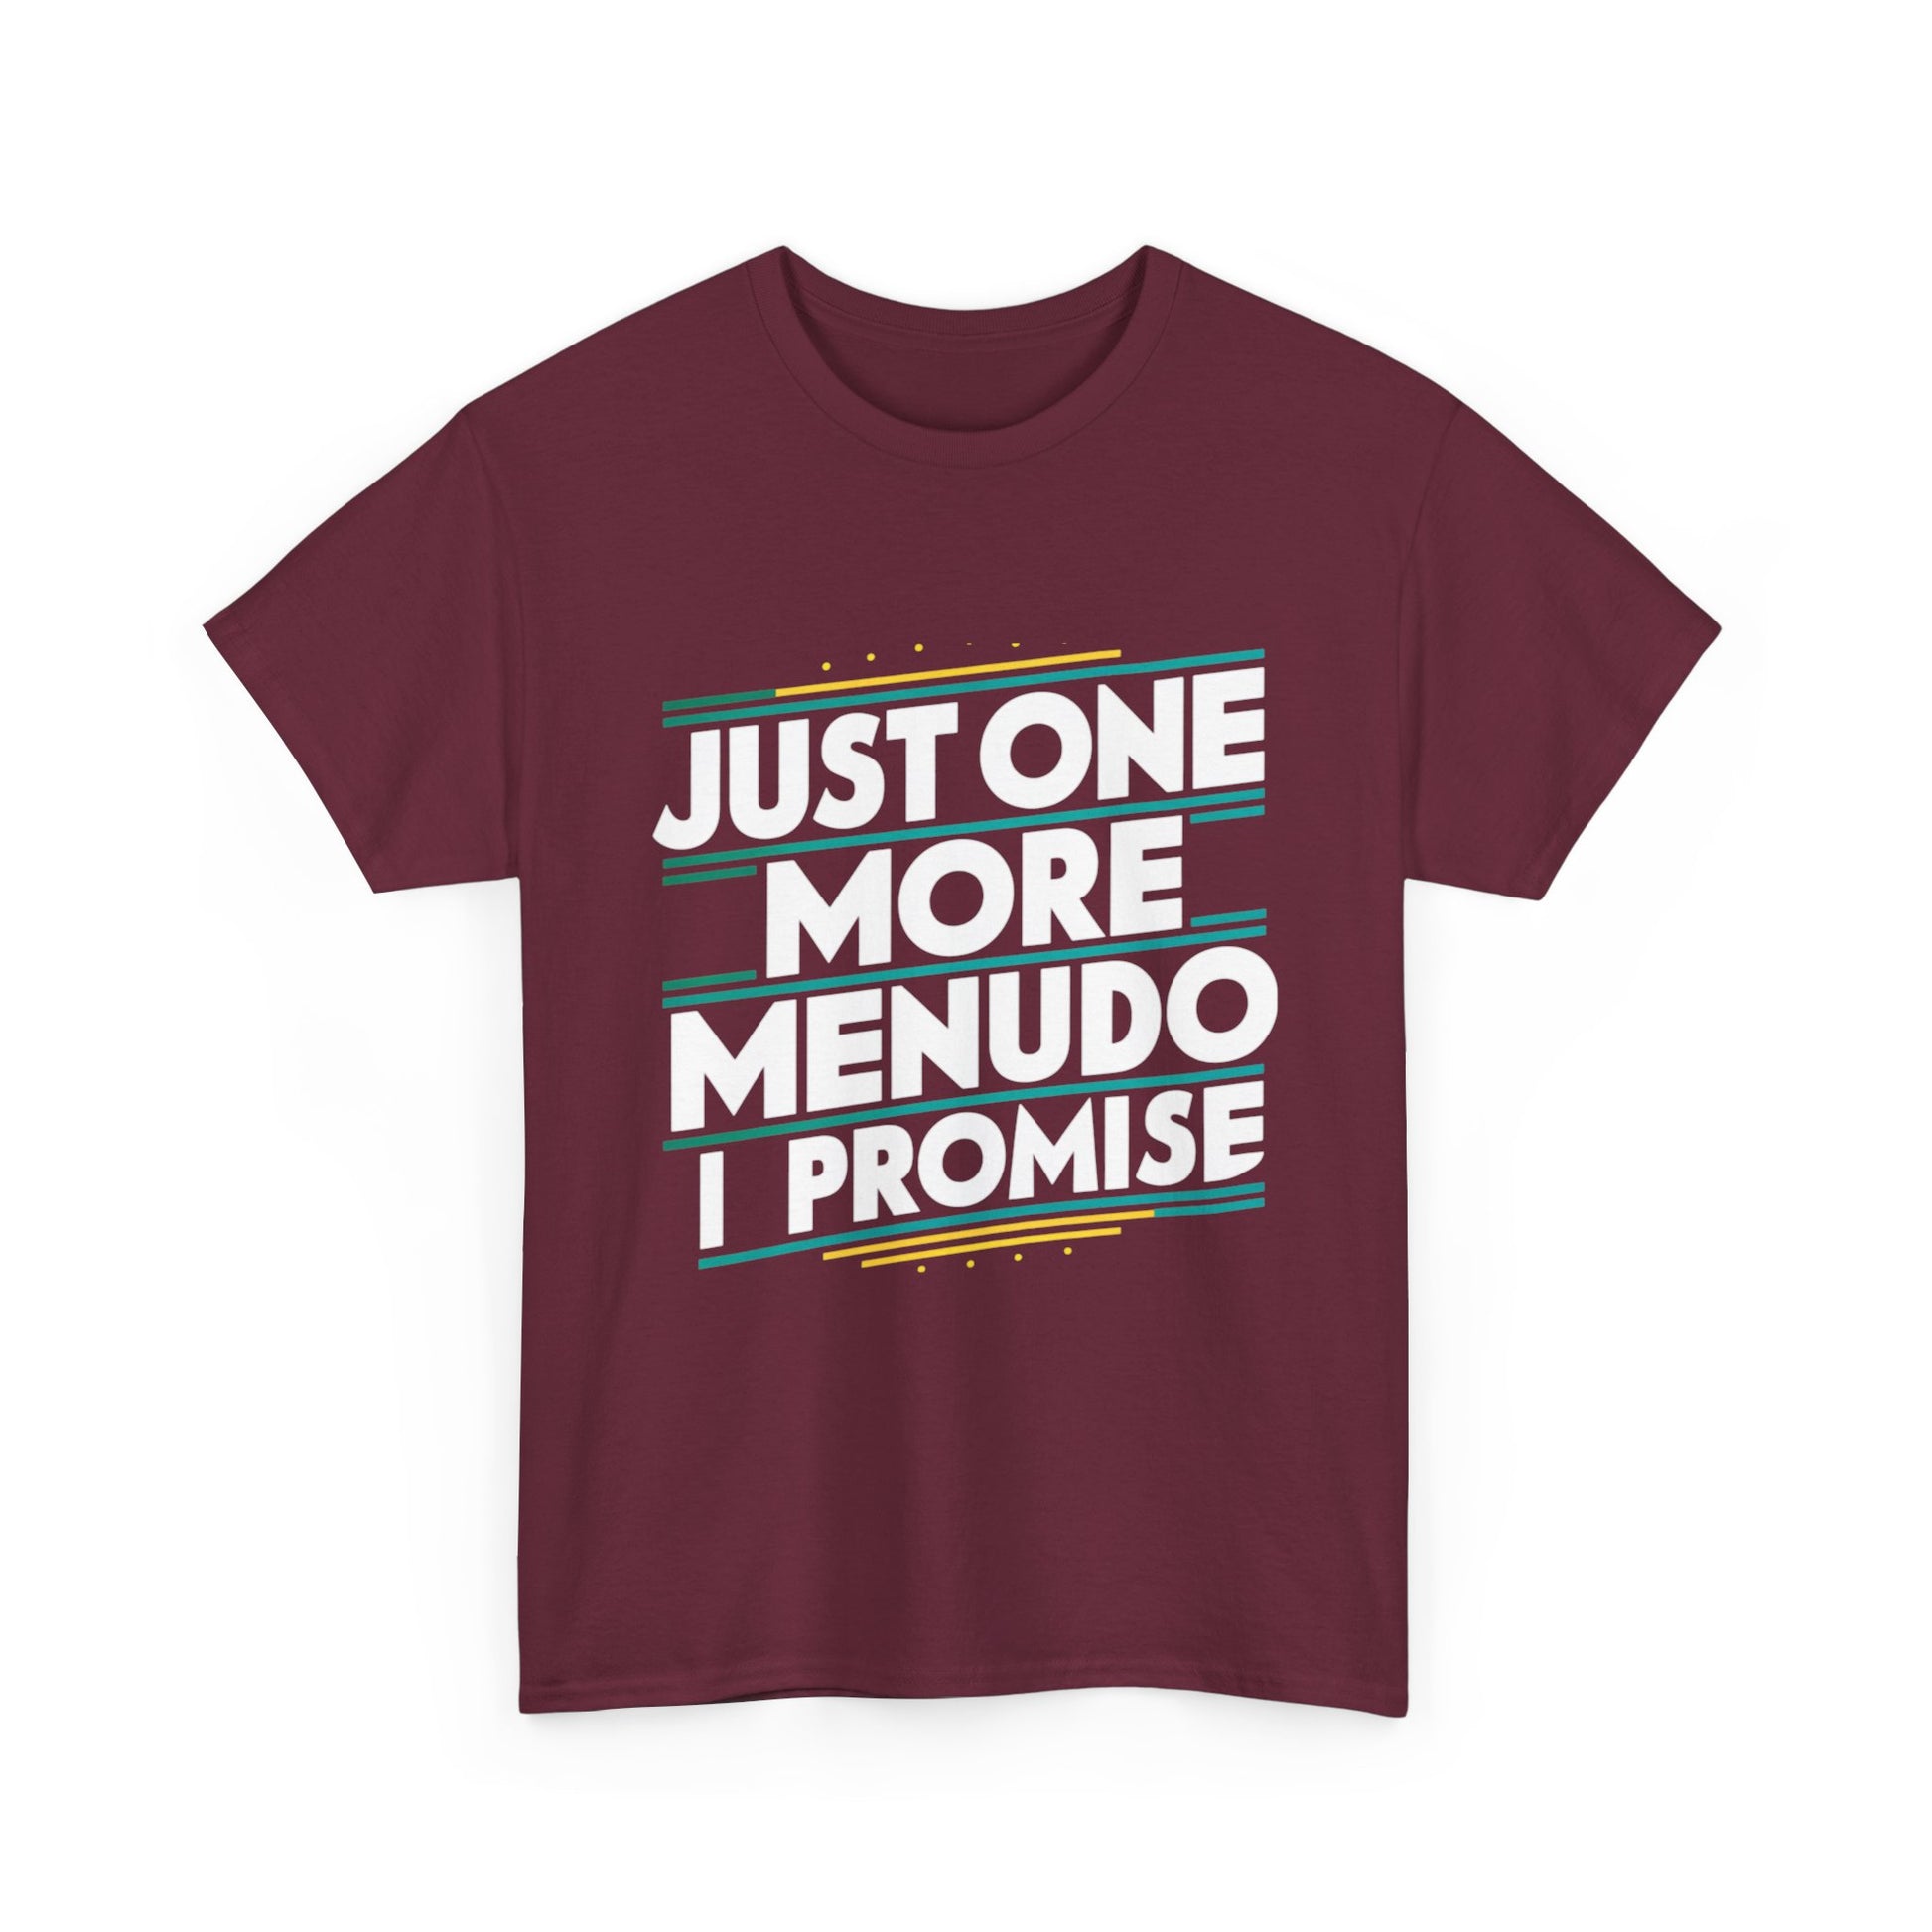 Just One More Menudo I Promise Mexican Food Graphic Unisex Heavy Cotton Tee Cotton Funny Humorous Graphic Soft Premium Unisex Men Women Maroon T-shirt Birthday Gift-27